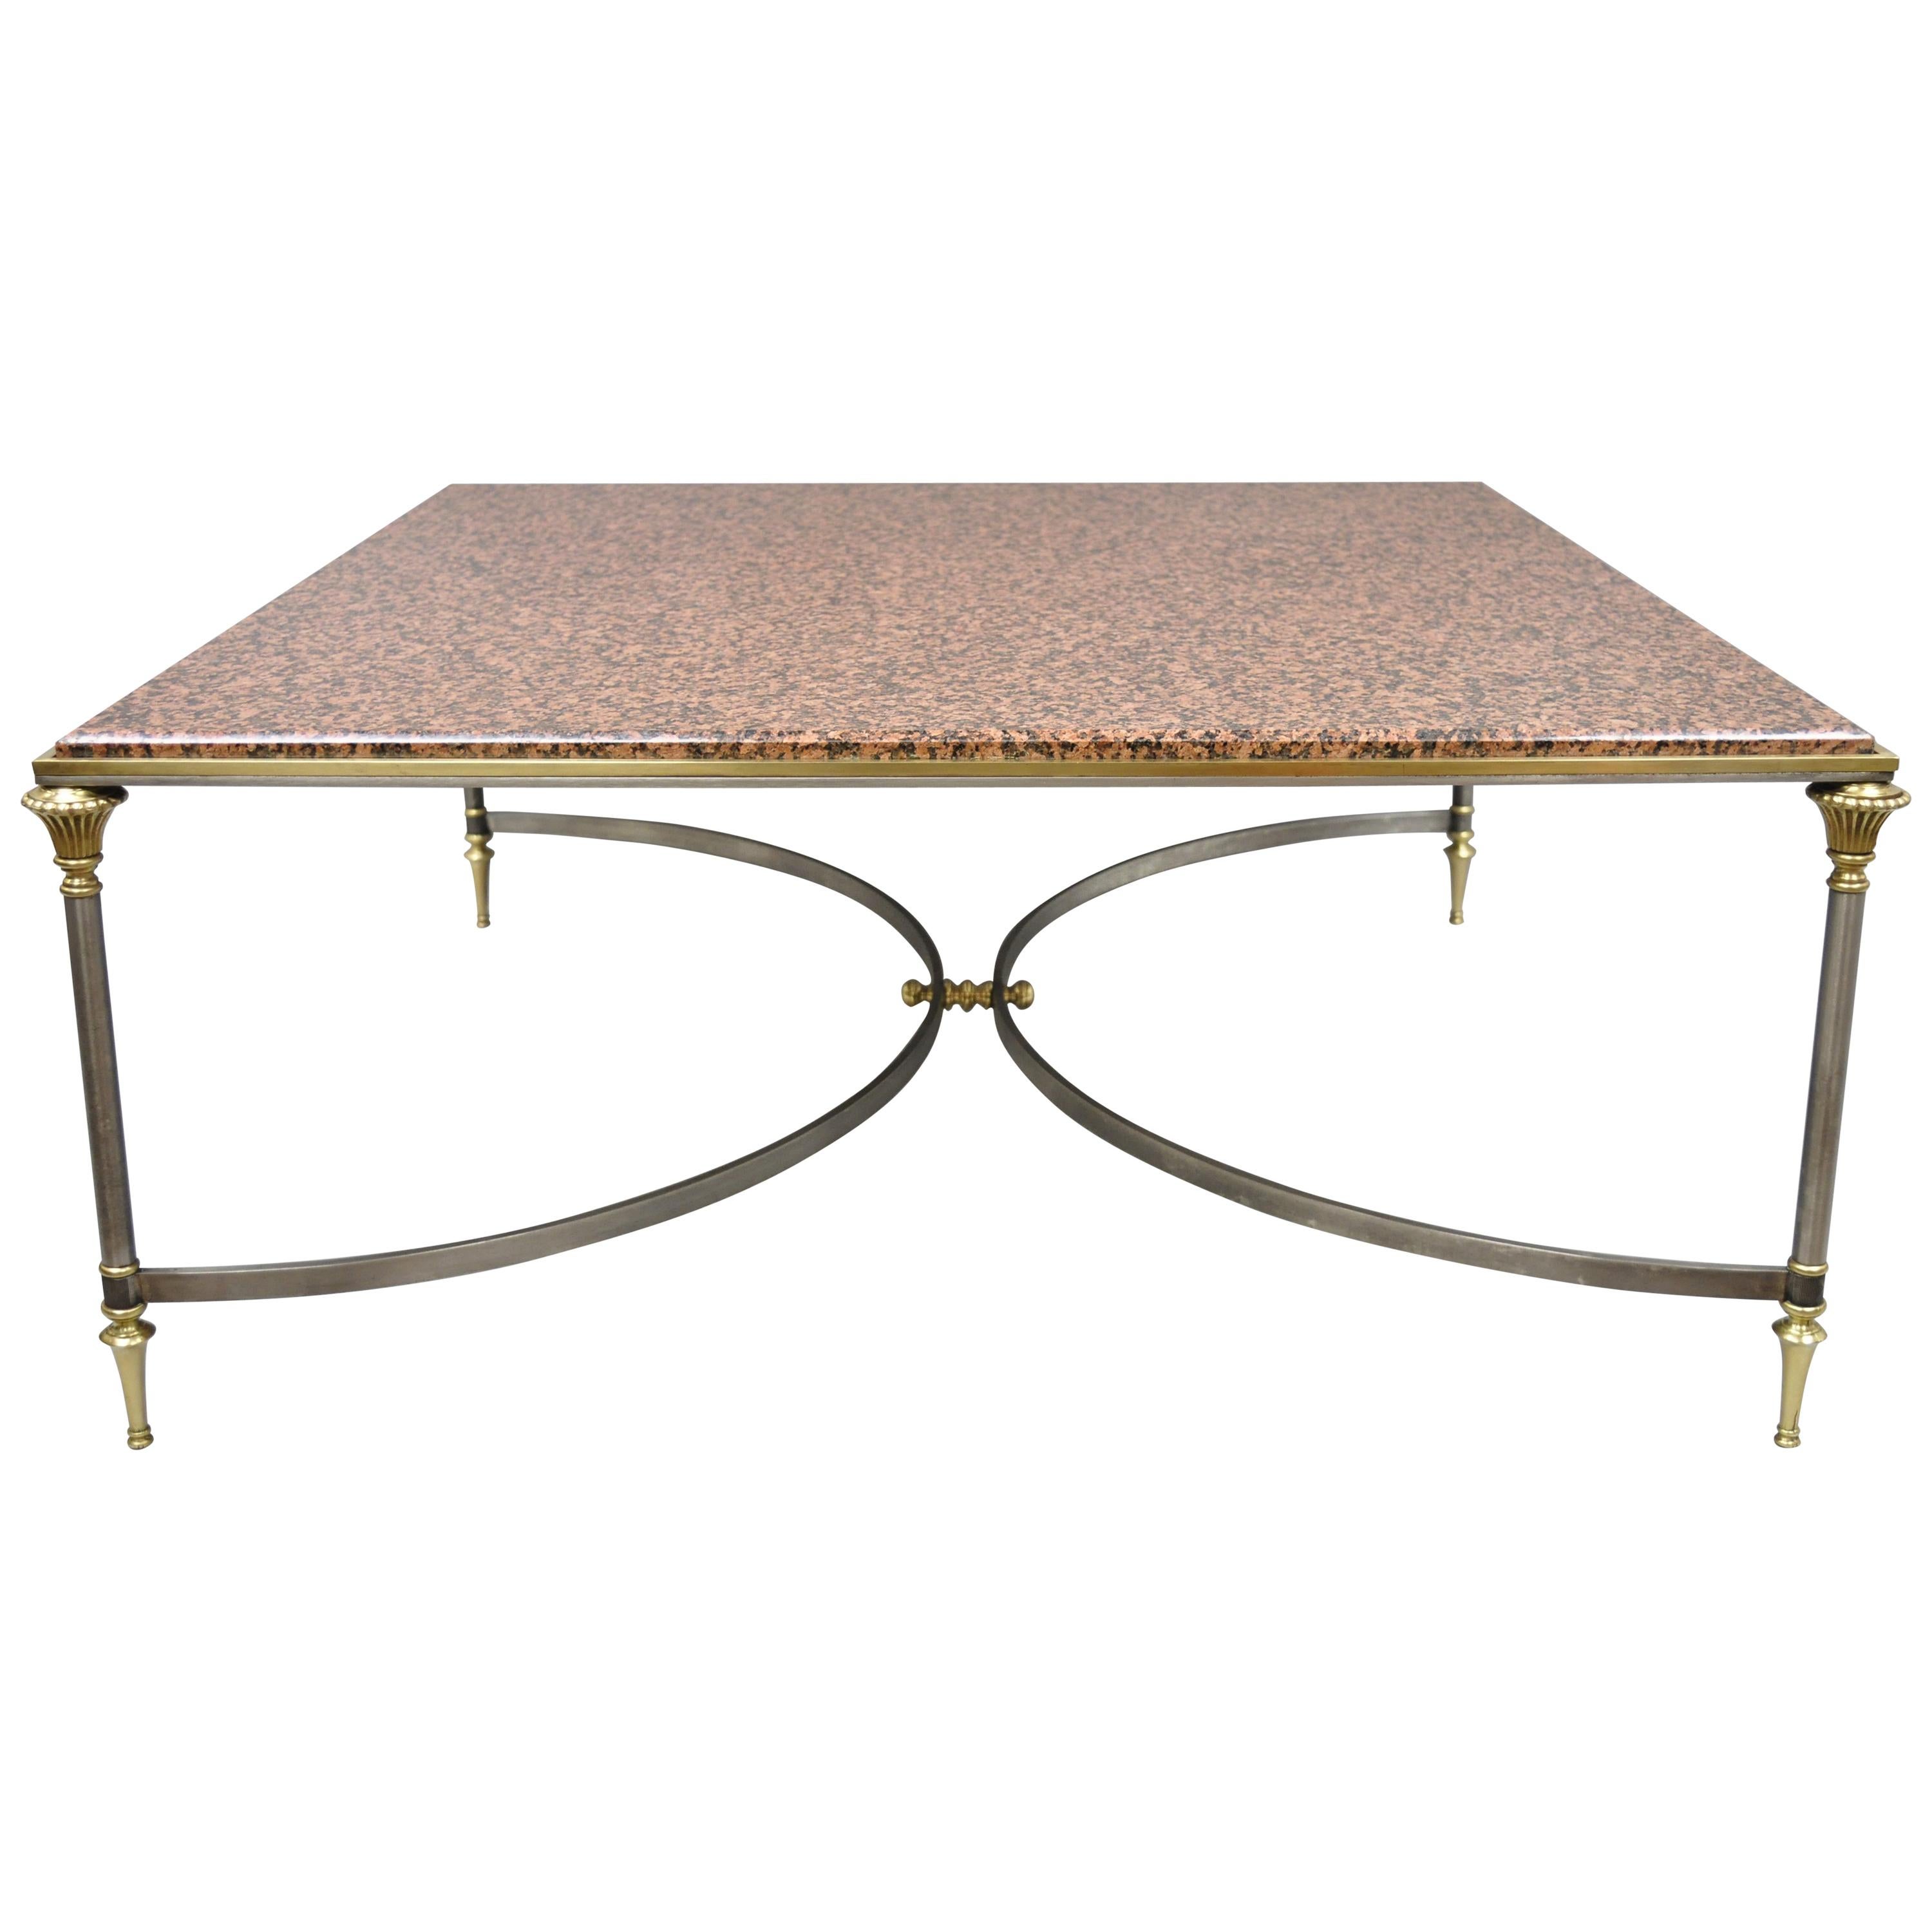 Large Square Pink Marble Top Steel & Brass Coffee Table Maison Jansen Attributed